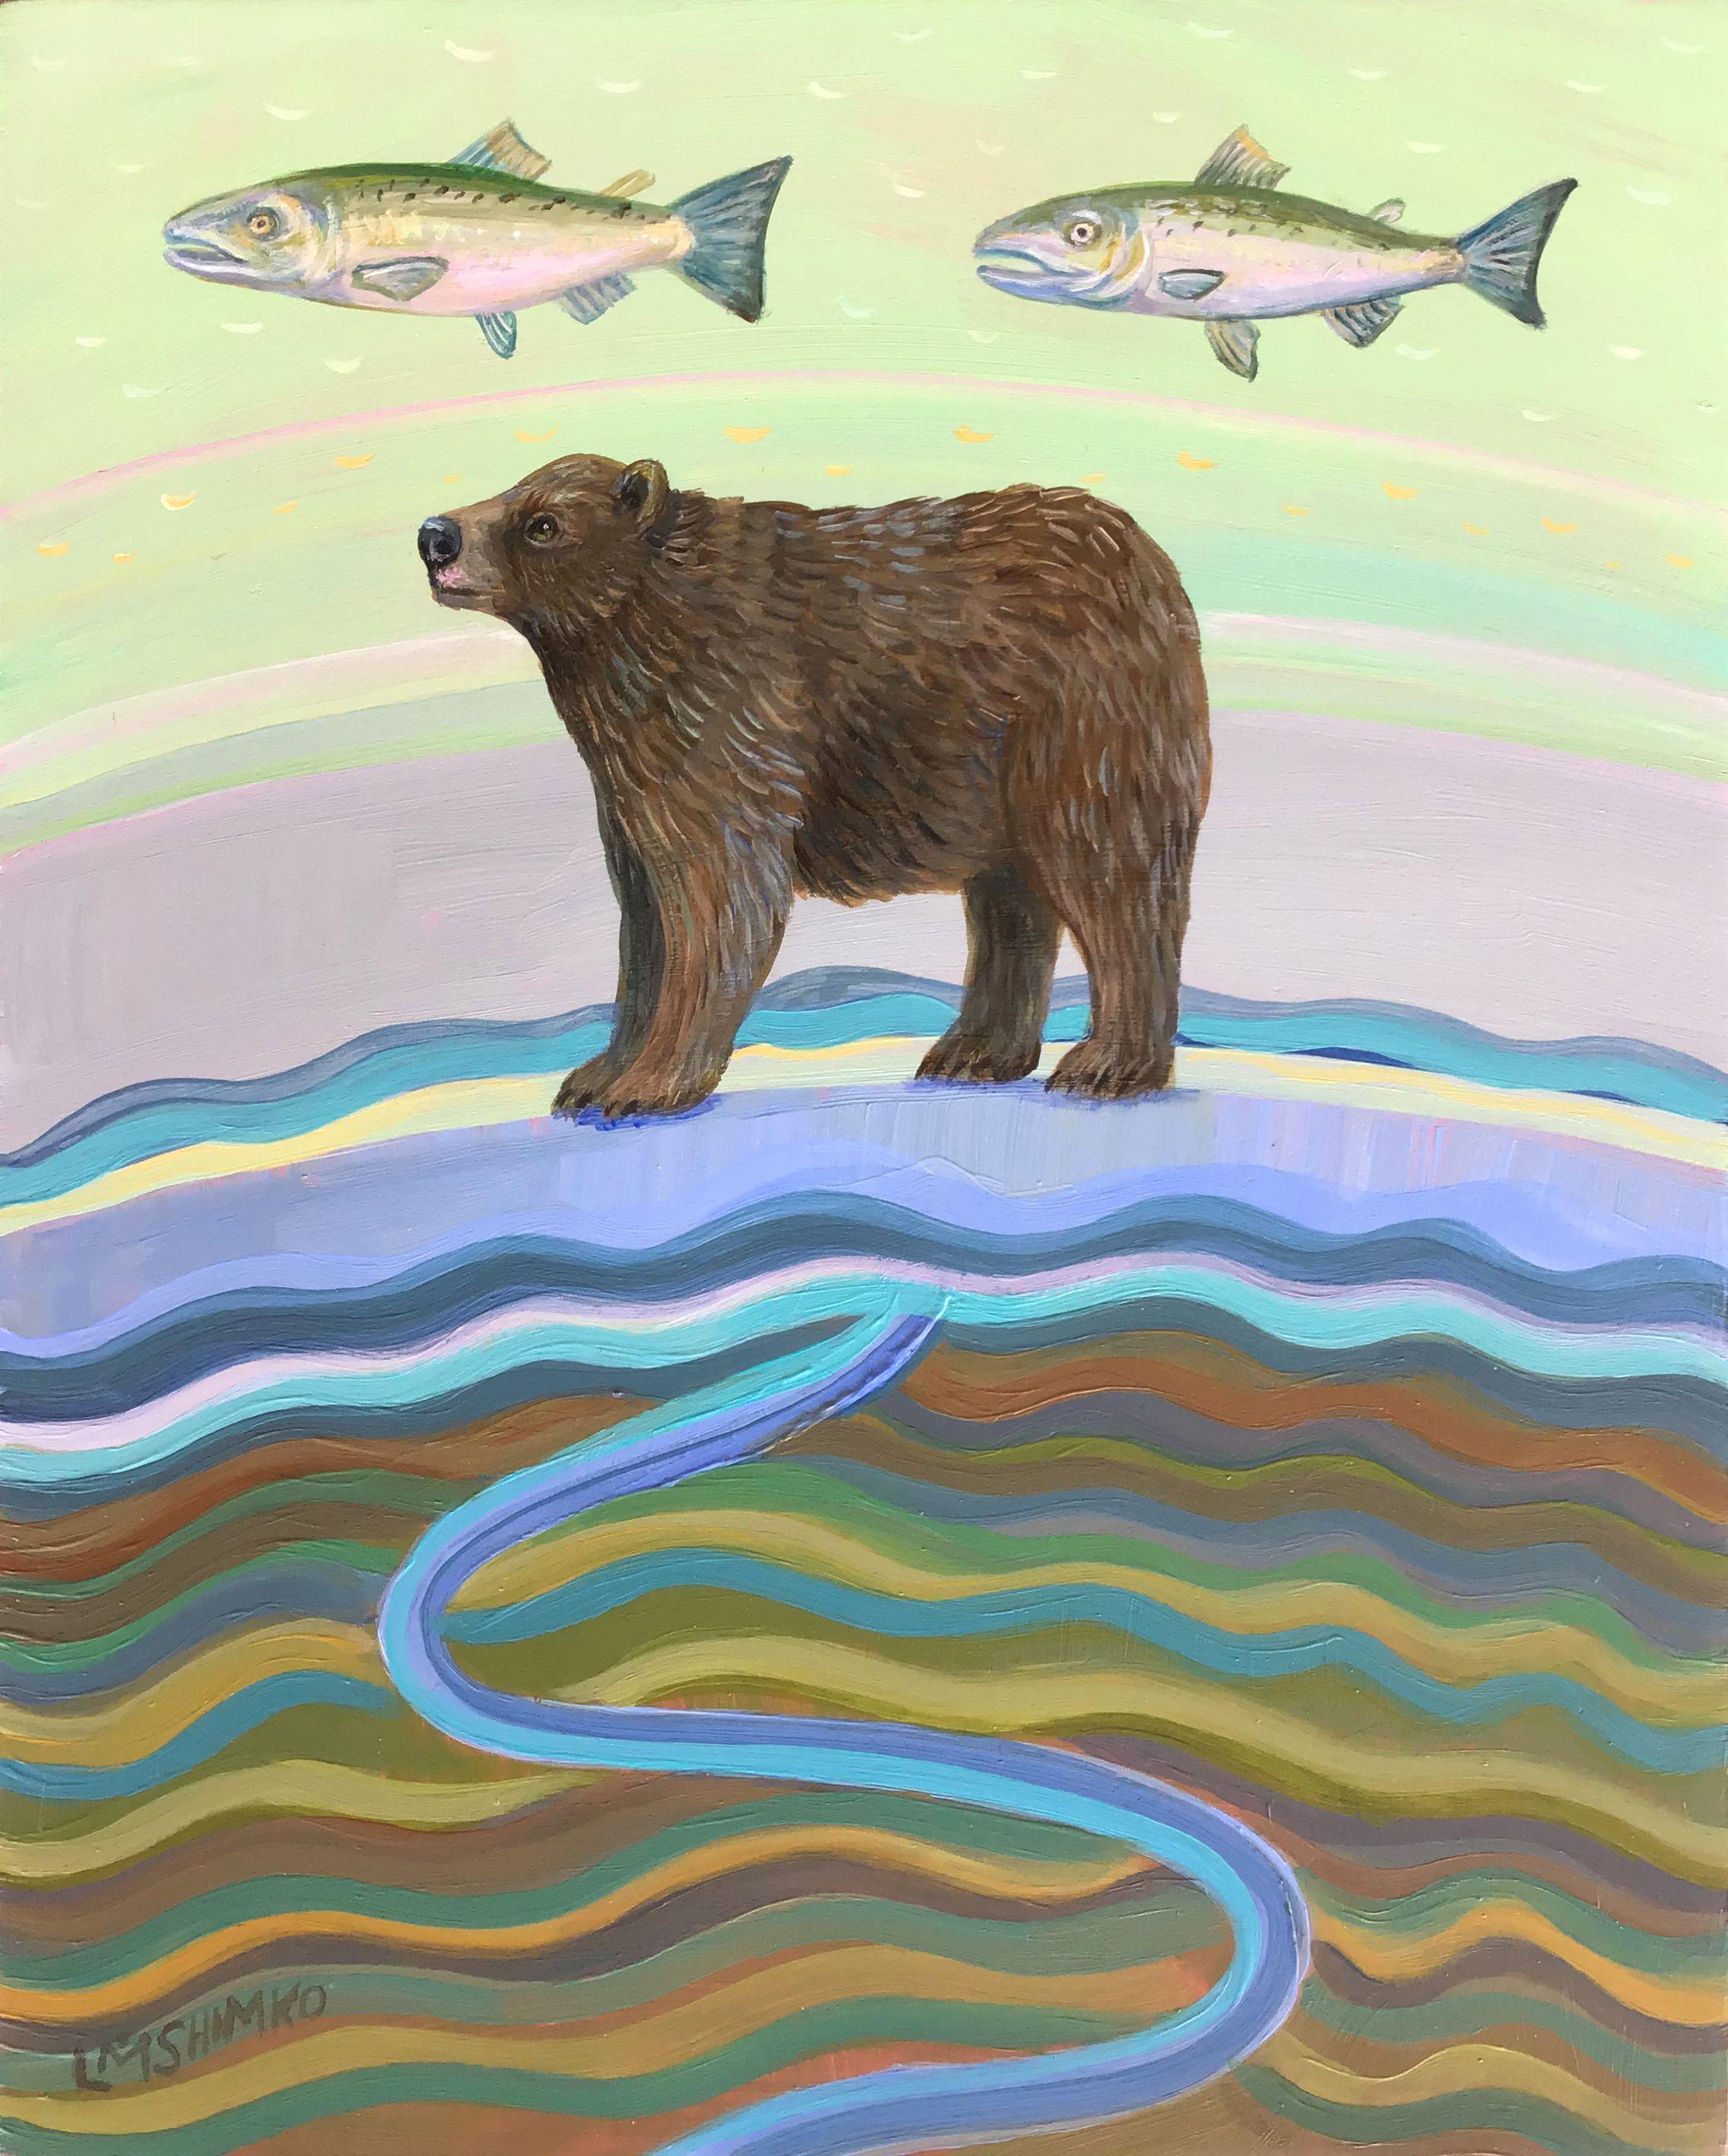 Lisa Shimko Landscape Painting - Grizzly Bear Dream 